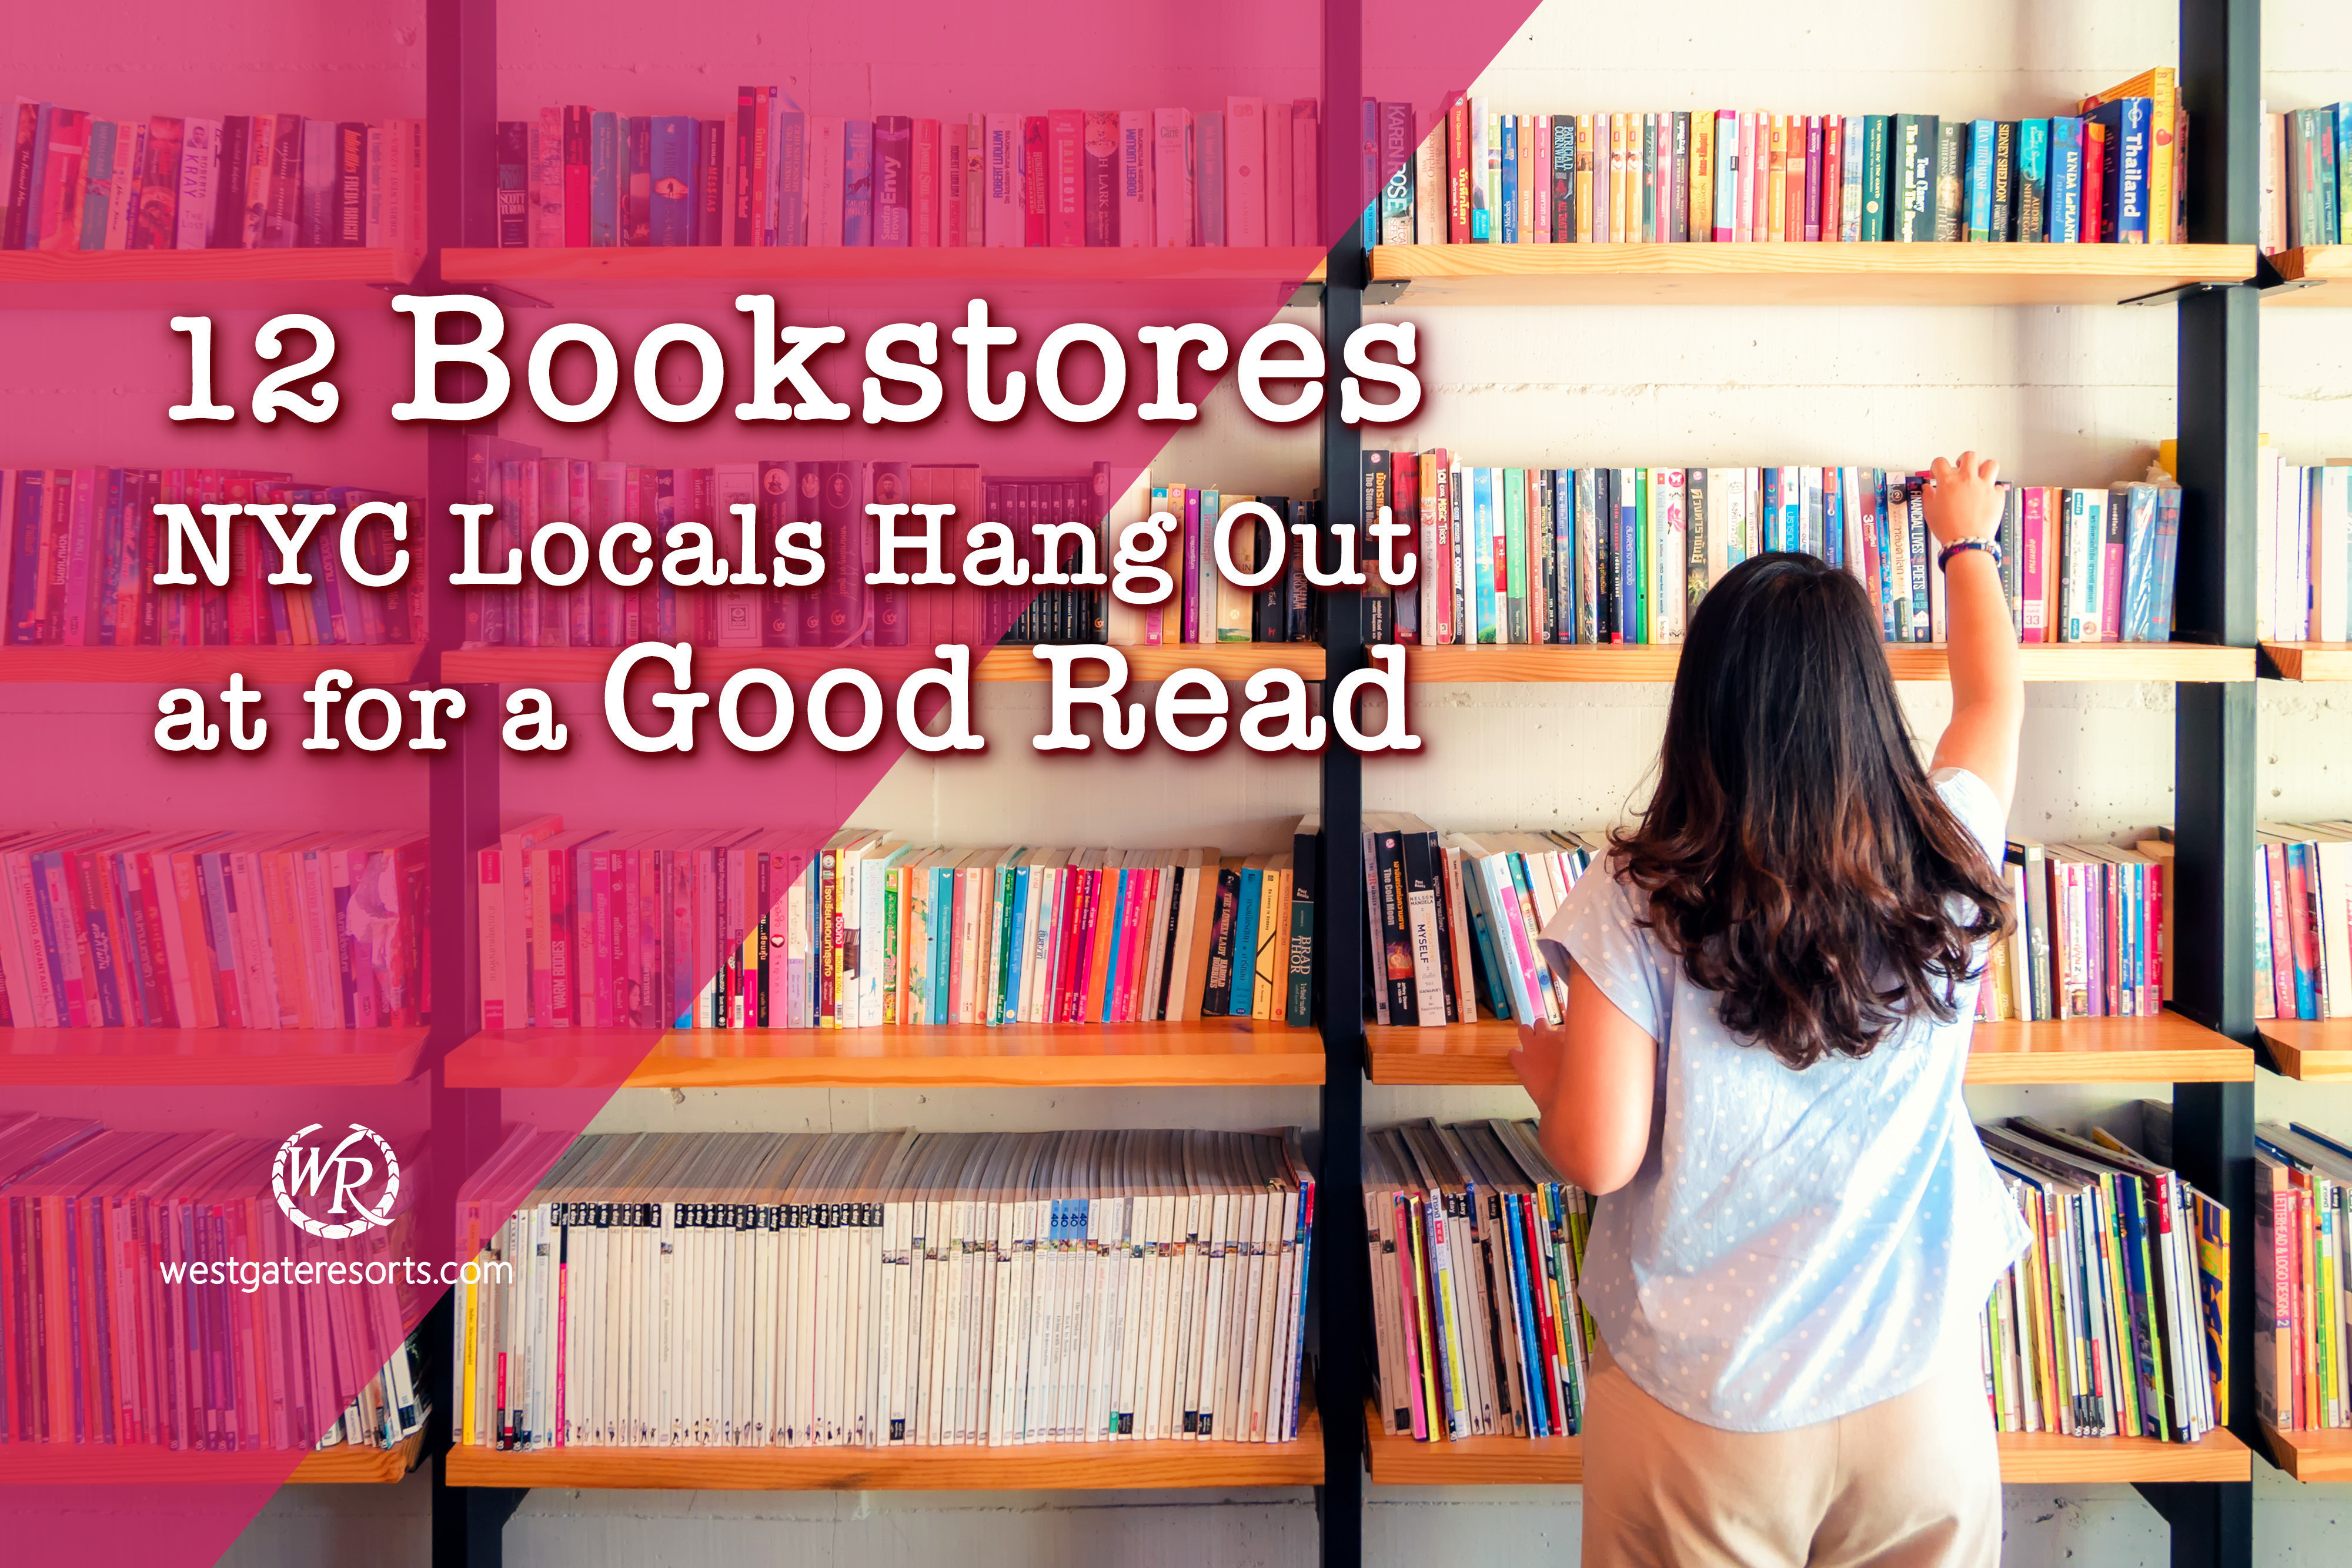 12 Bookstores NYC Locals Hang Out at for a Good Read